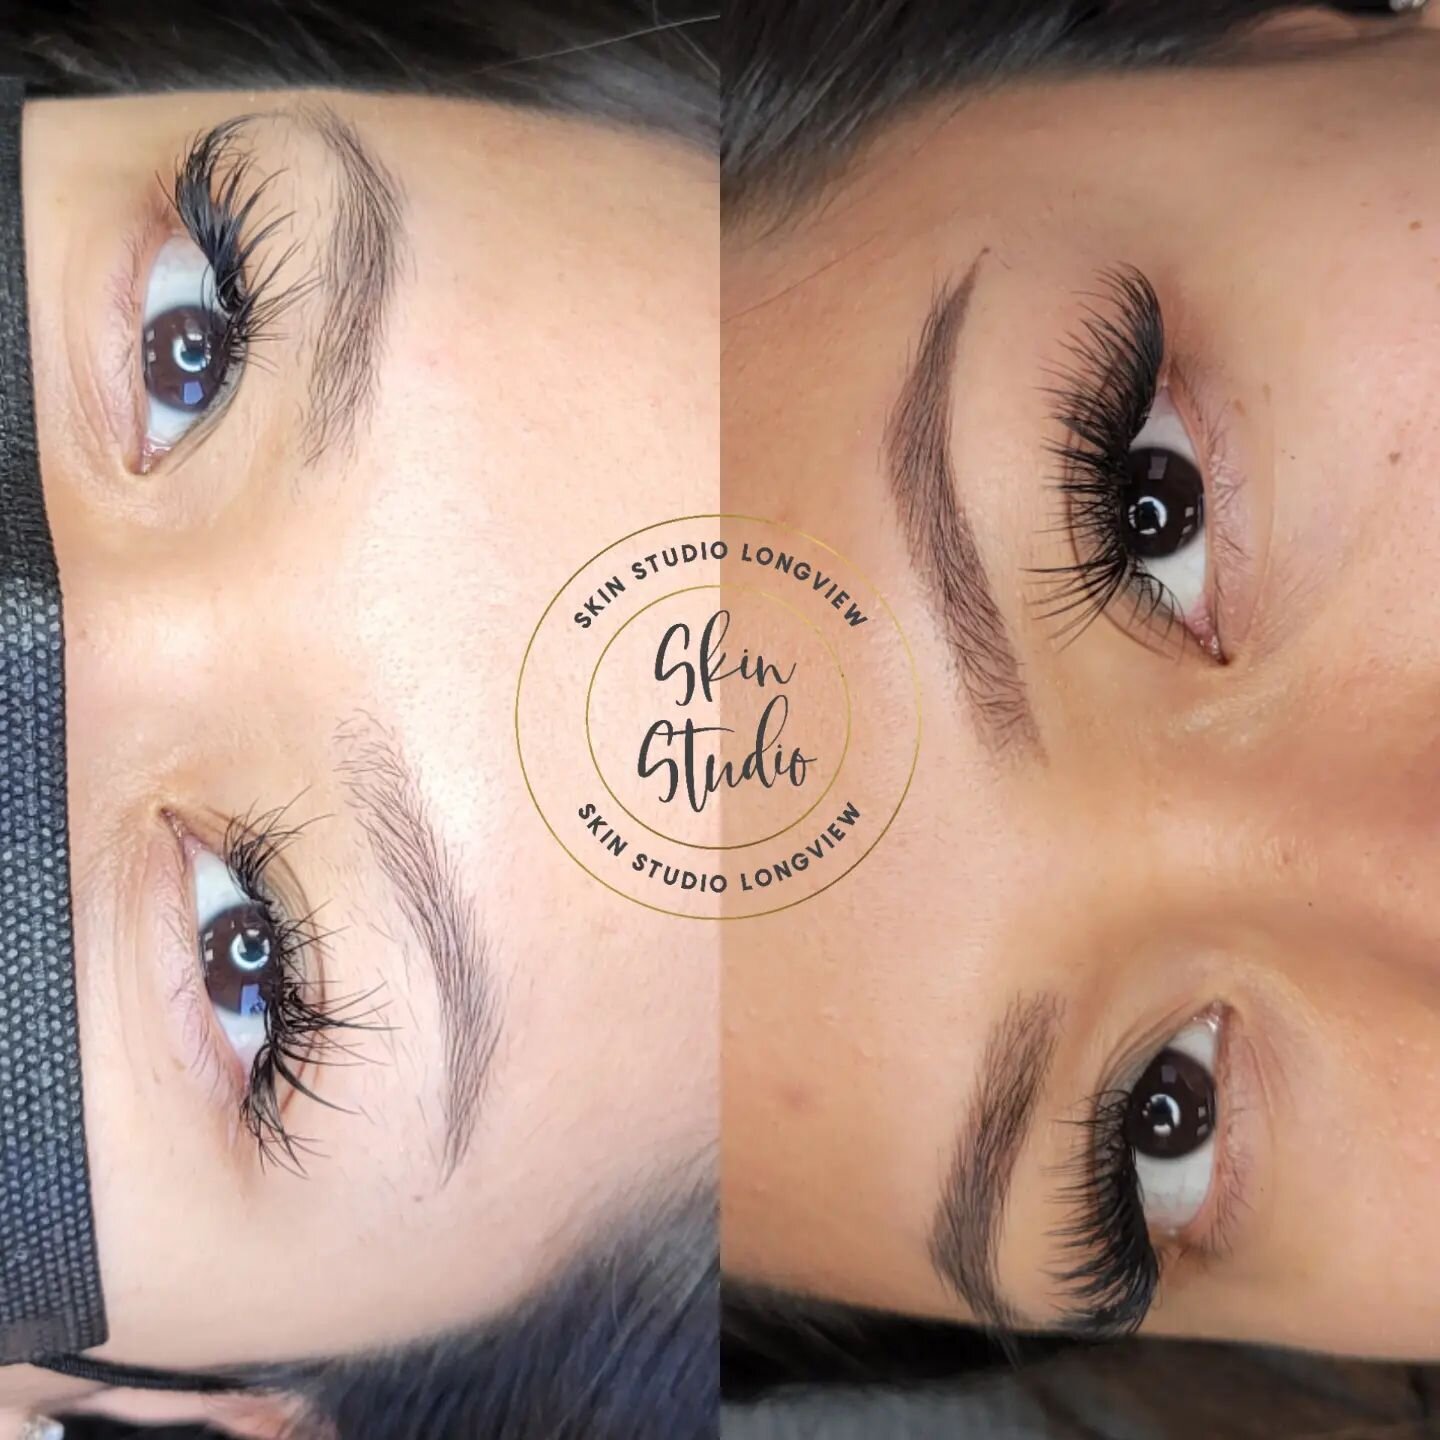 ✮6 𝐖𝐄𝐄𝐊𝐒 𝐇𝐄𝐀𝐋𝐄𝐃✮
Left: before Ombre Brows
Right: 6 weeks healed after 1 session, before touchup with 𝙉𝙊 makeup on
 ⊶⊷⊶⊷⊶⊷⋆⊶⊷⊶⊷⊶
 𝑩𝒐𝒐𝒌𝒊𝒏𝒈, 𝑭𝑨𝑸𝒔, 𝒎𝒐𝒓𝒆 𝒊𝒏𝒇𝒐 👇
www.skinstudiolongview.com
 ⊶⊷⊶⊷⊶⊷⋆⊶⊷⊶⊷⊶
 𝑮𝒊𝒇𝒕 𝒄𝒂𝒓𝒅𝒔